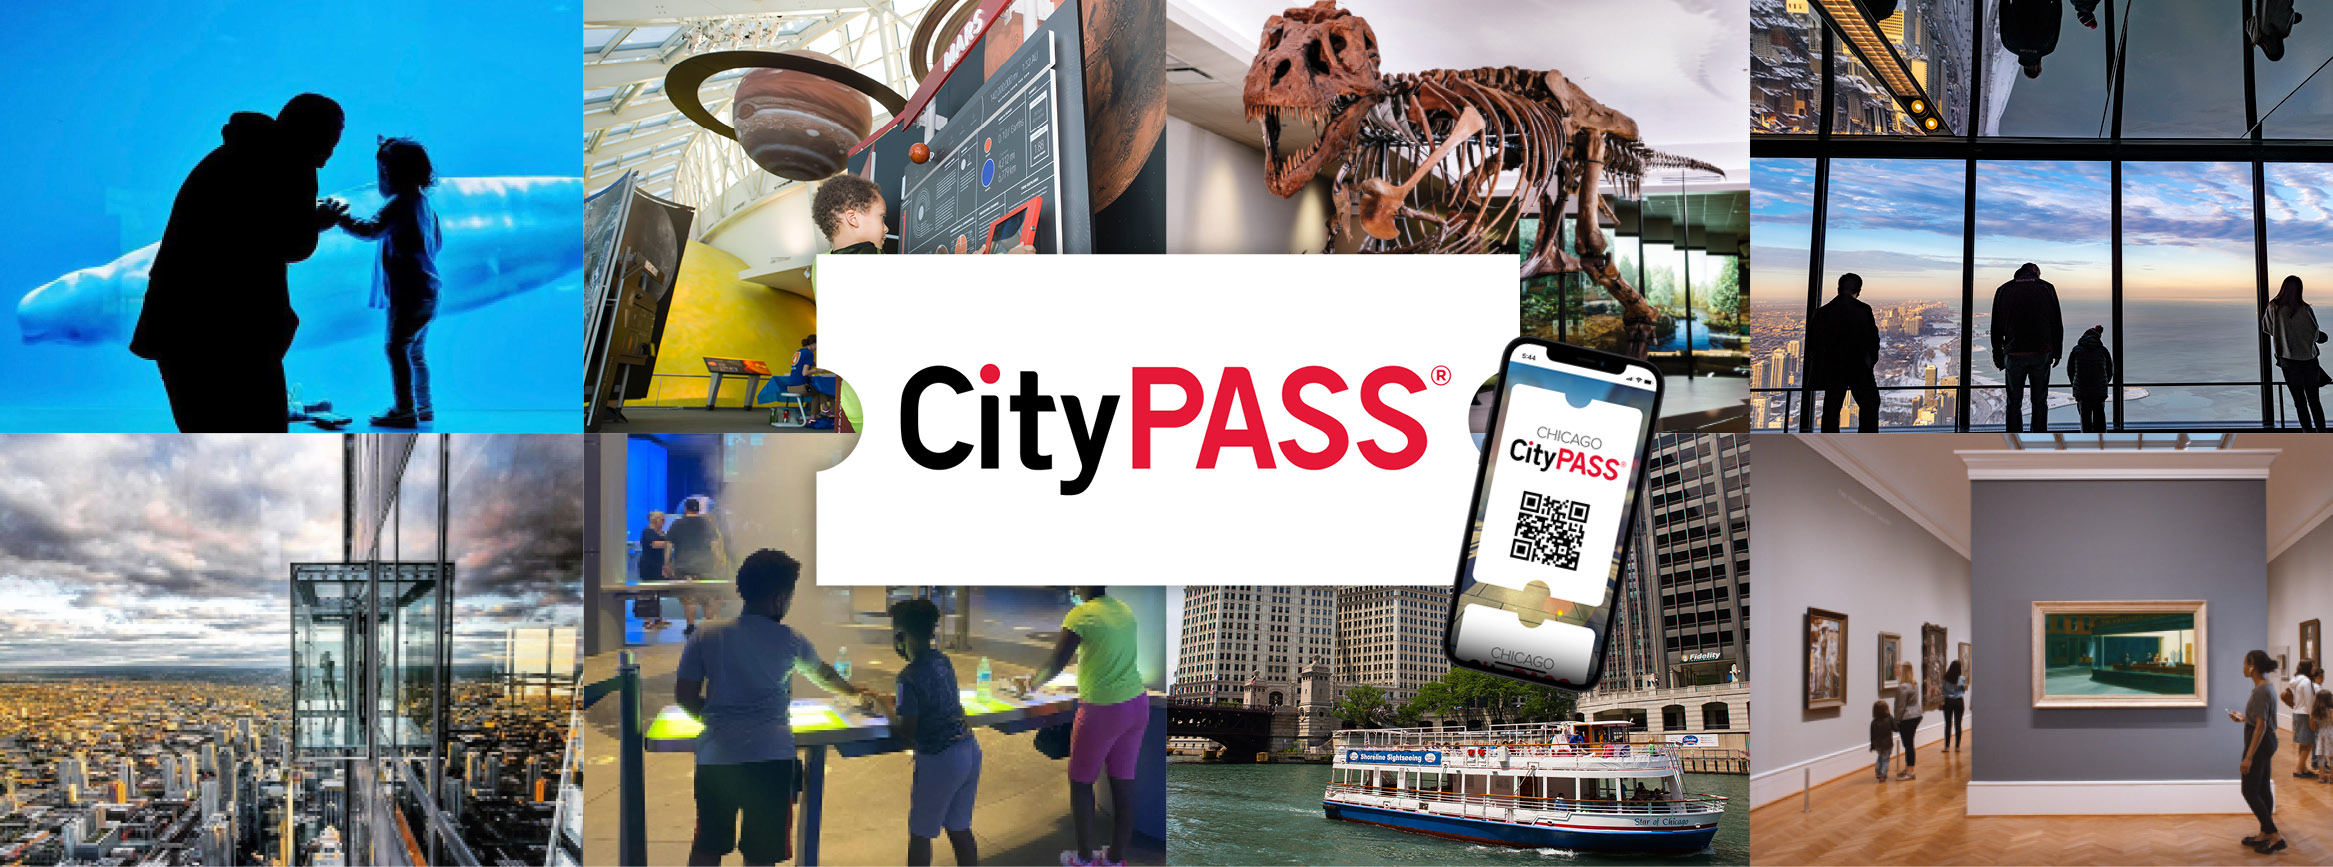 Collage of various Chicago cultural attraction images included as options with a Chicago CityPASS ticket.